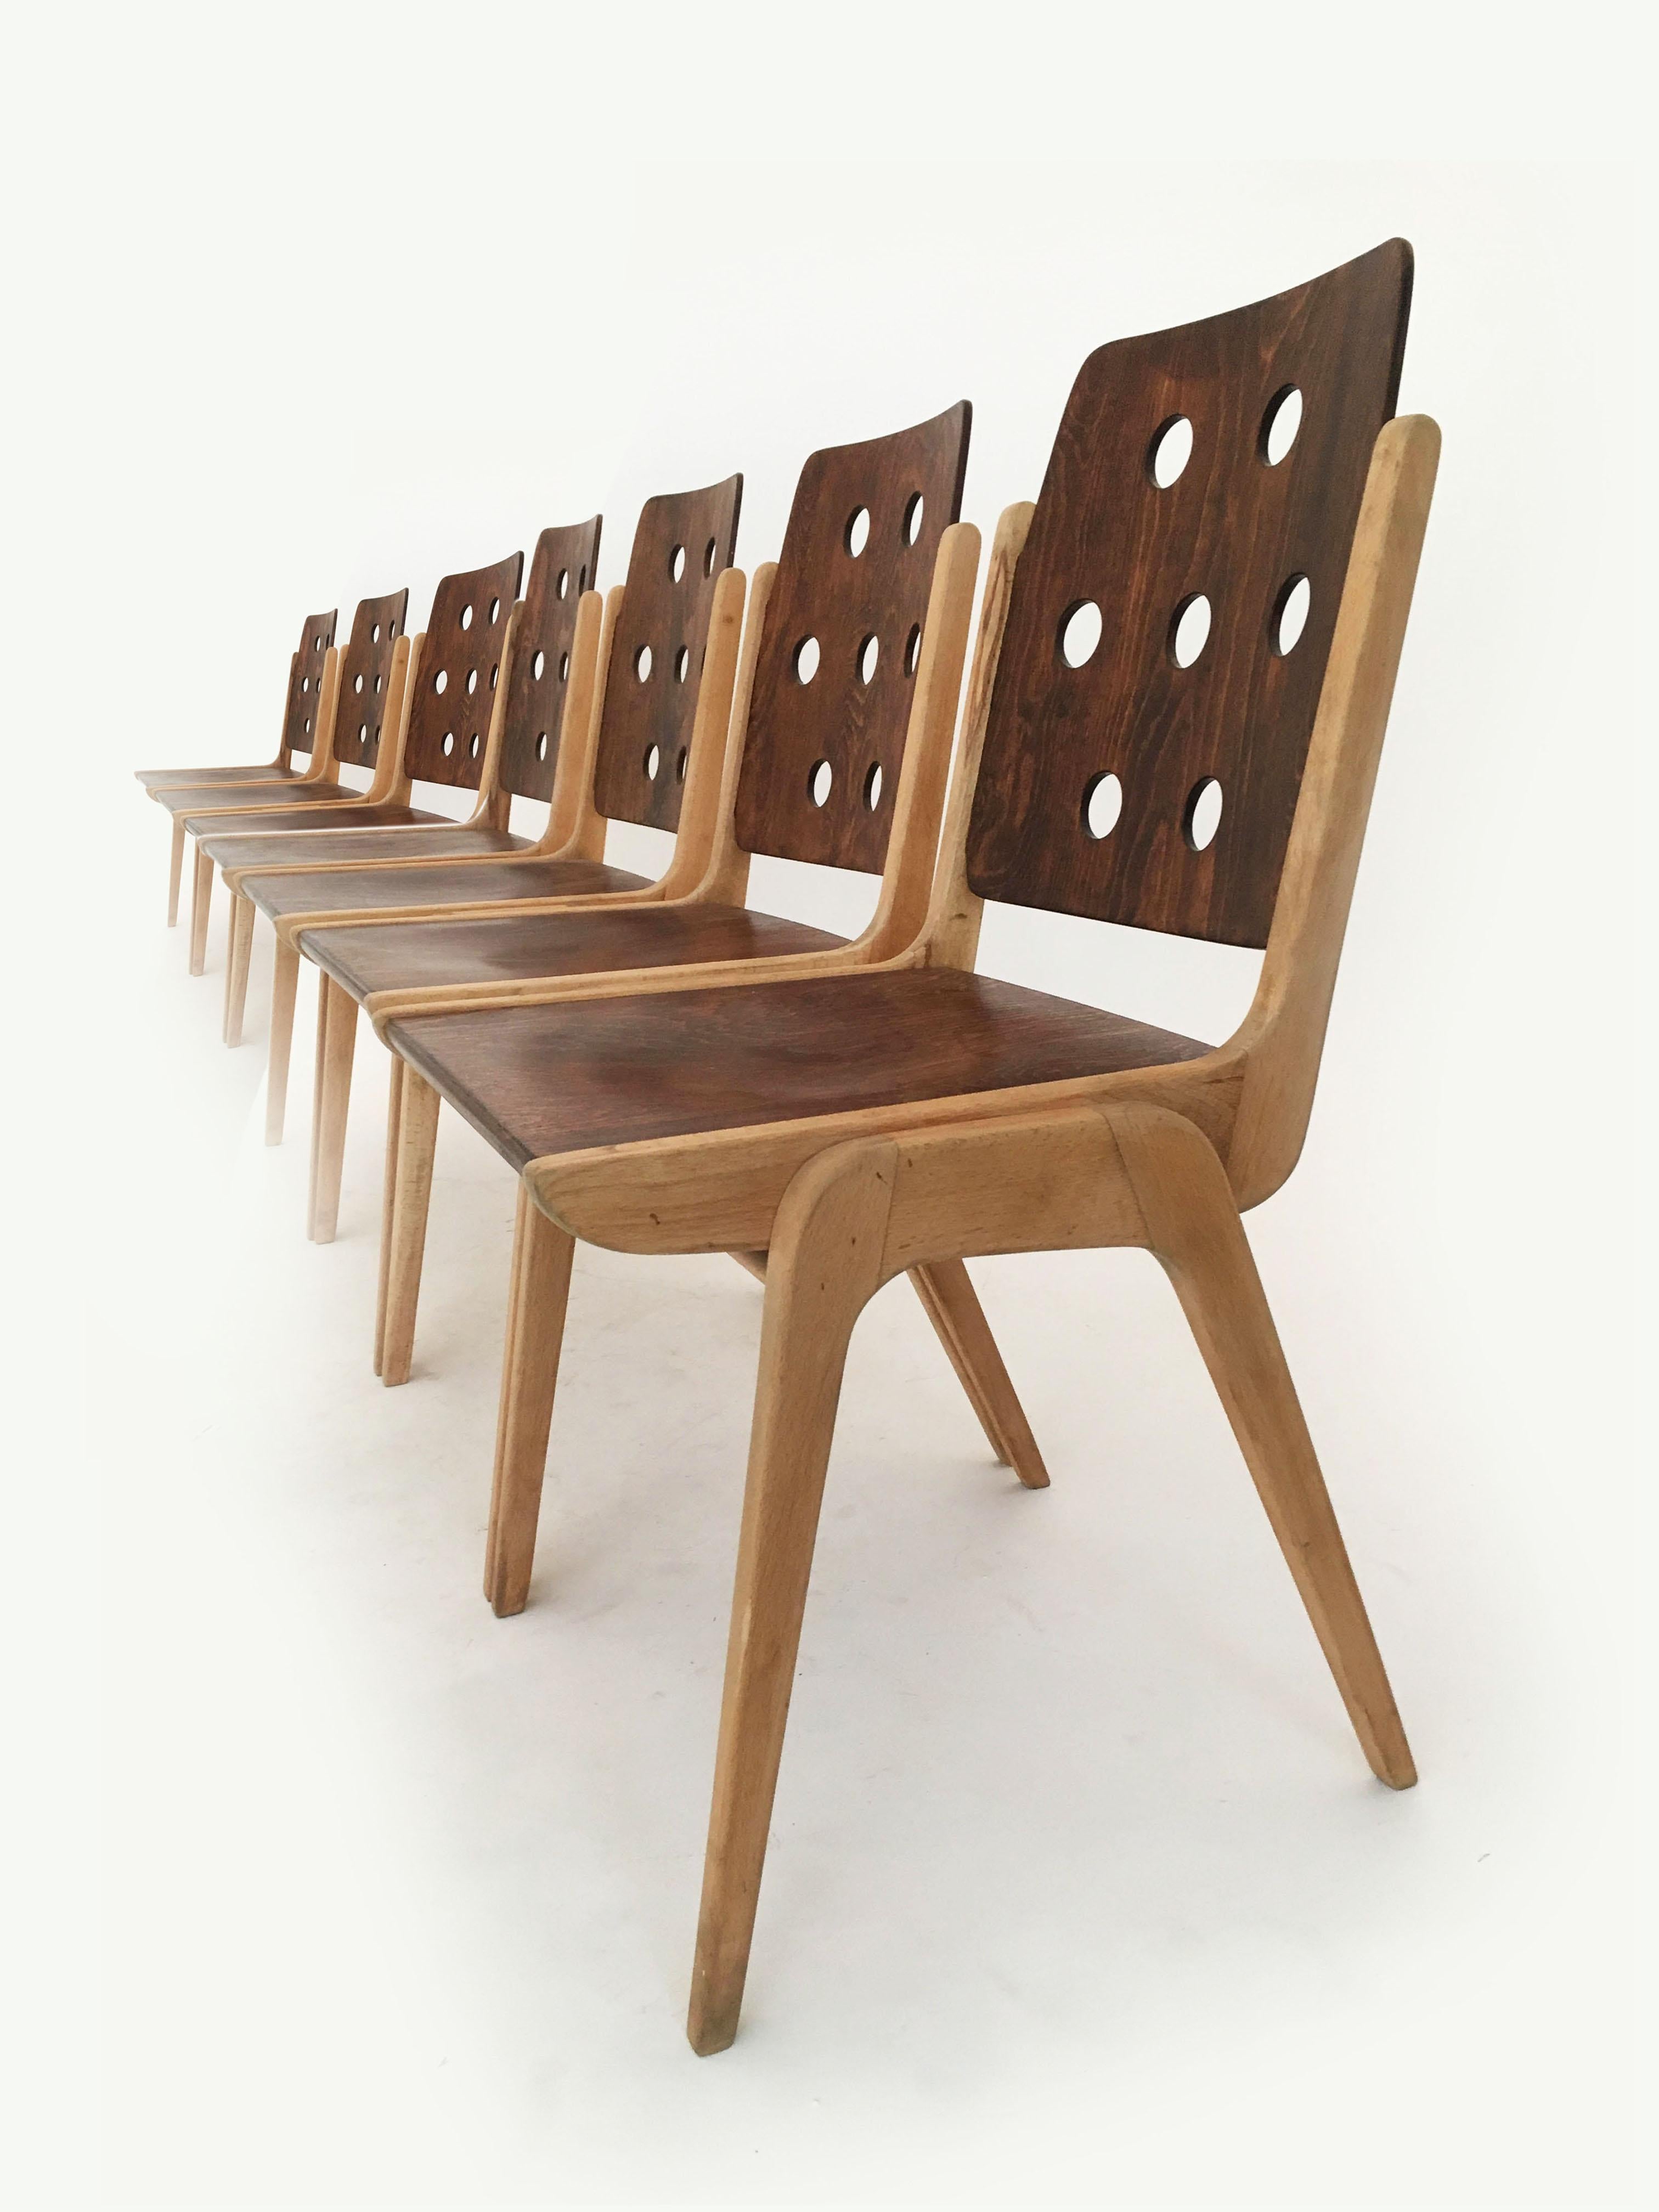 Beech Set of Eight Stacking Dining Chairs Franz Schuster, Duo-Colored, Austria, 1950s For Sale